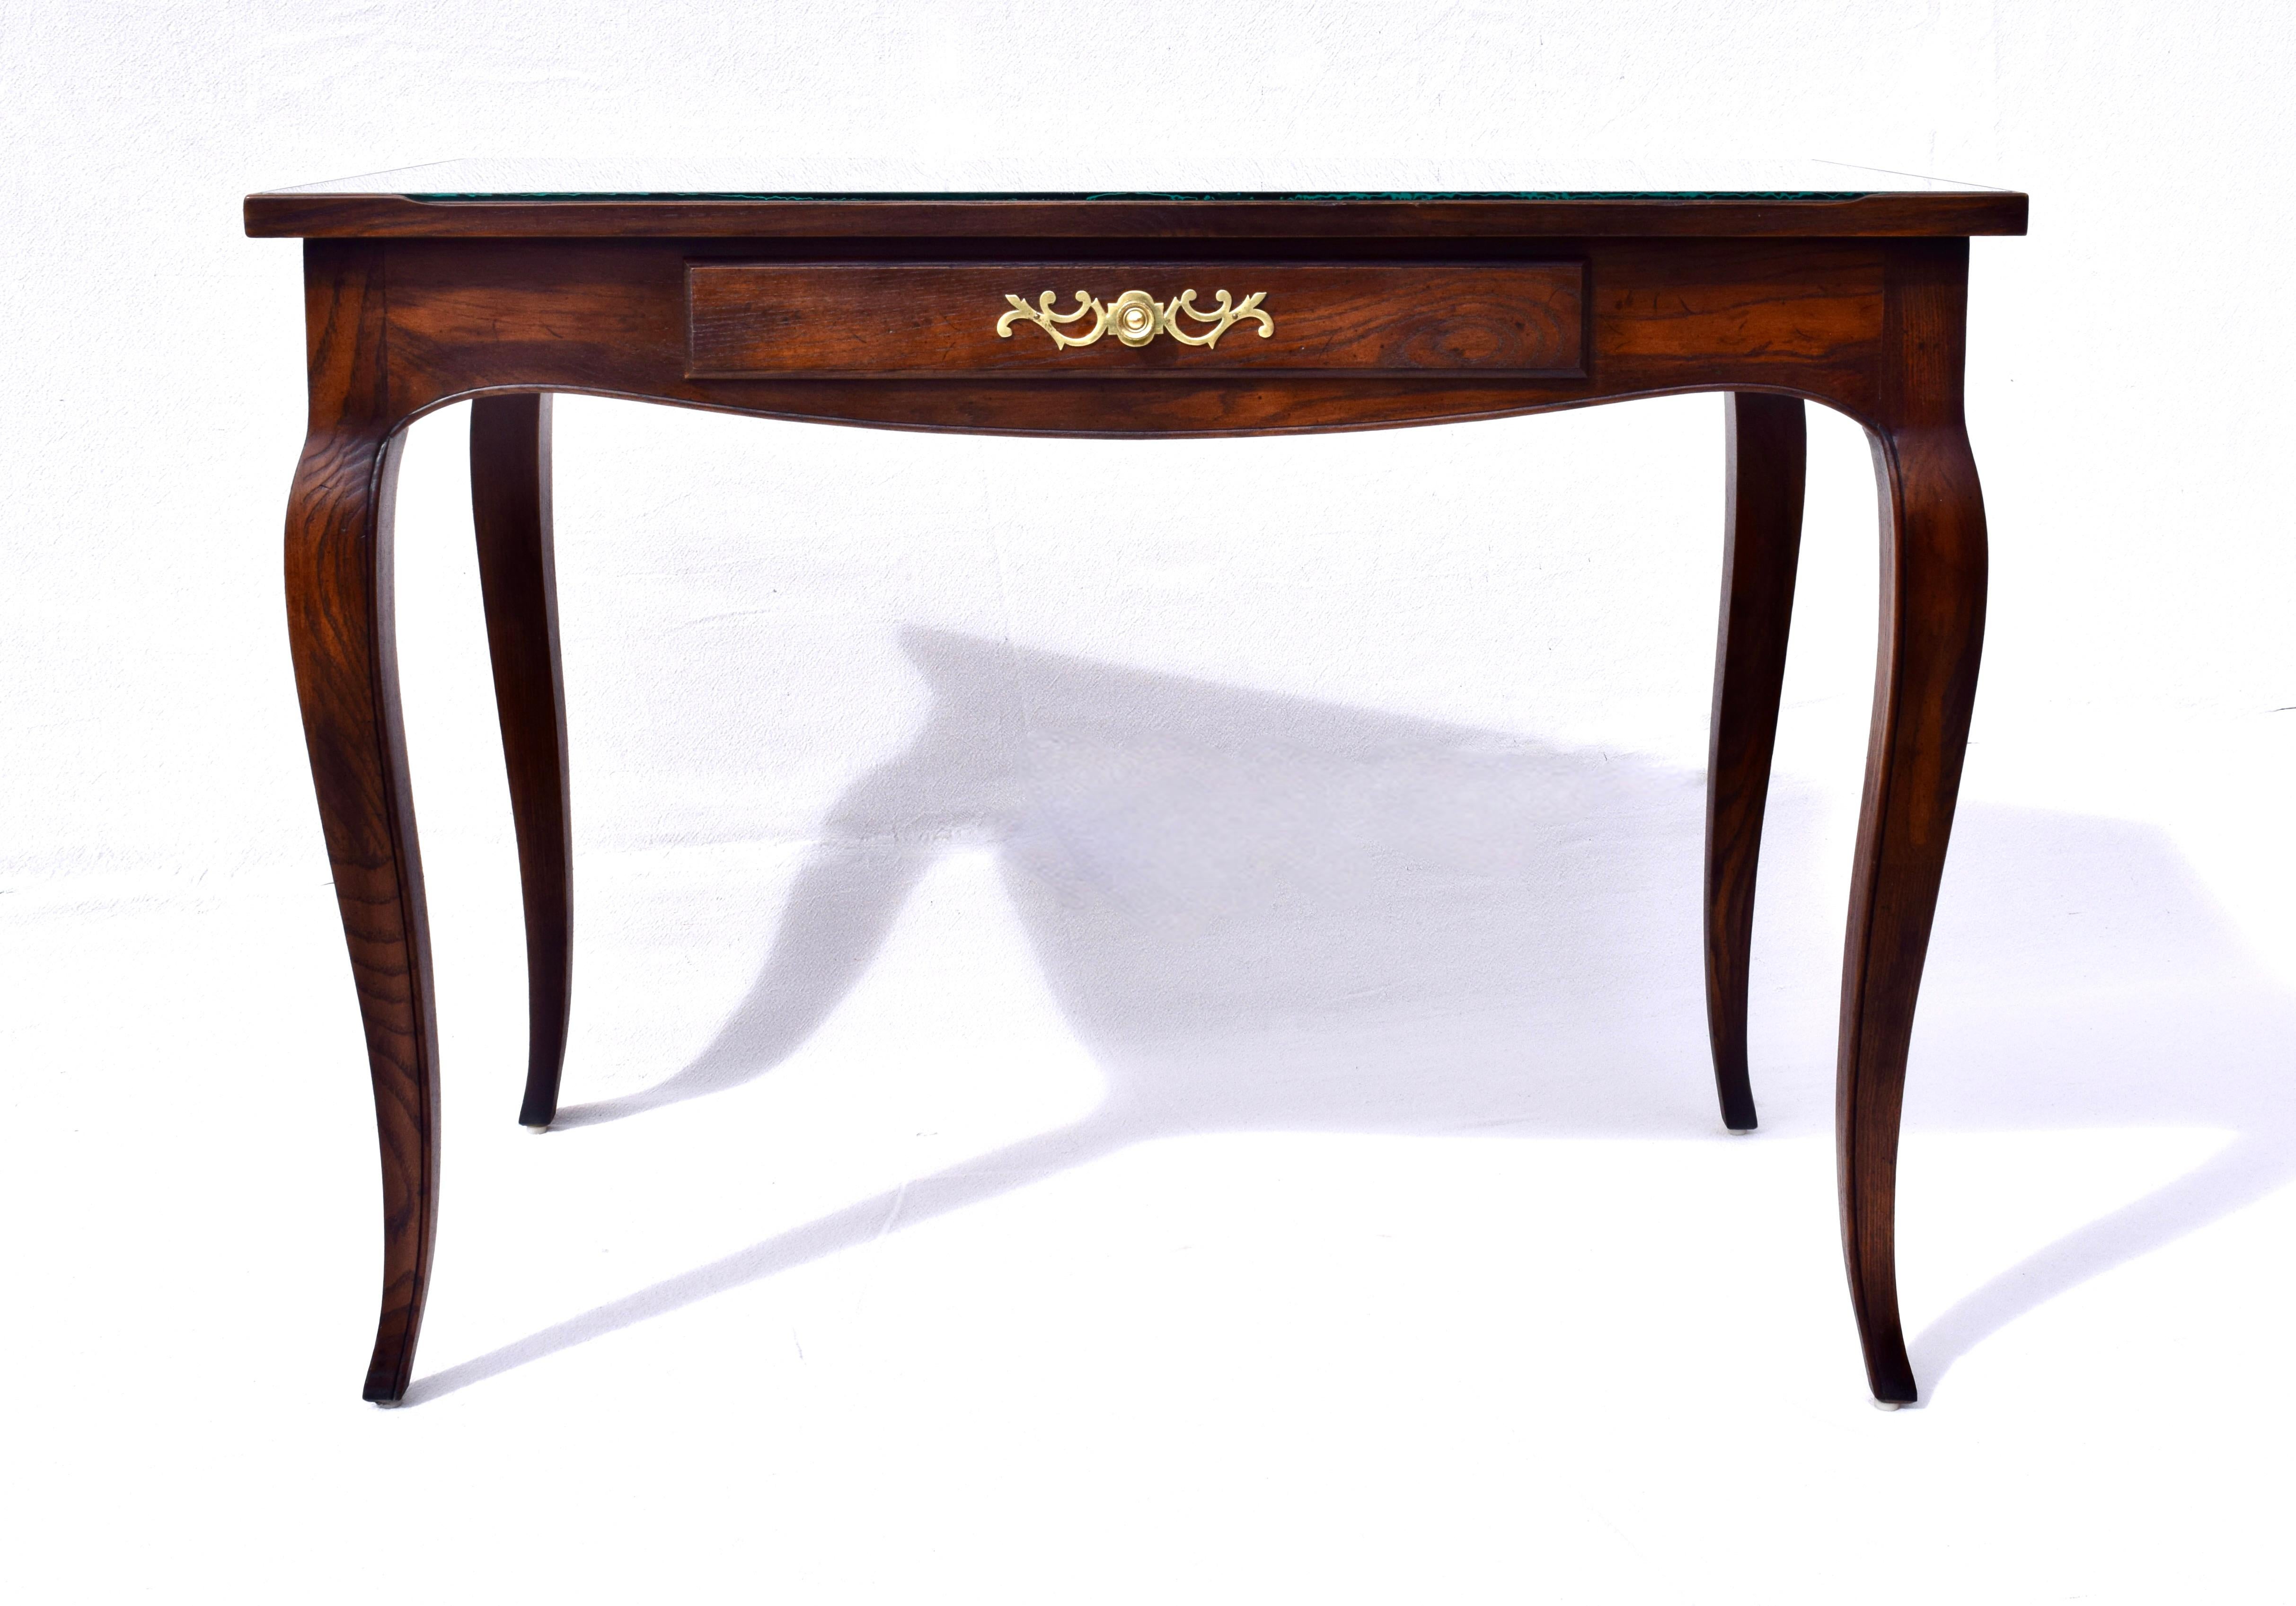 French Country style desk with custom glass top by Henredon USA, Circa 1960s.
Featuring impressive Tiger Oak grains finished on all sides, the desk boasts classic elegance suitable for placement in a wide variety of settings; including center room